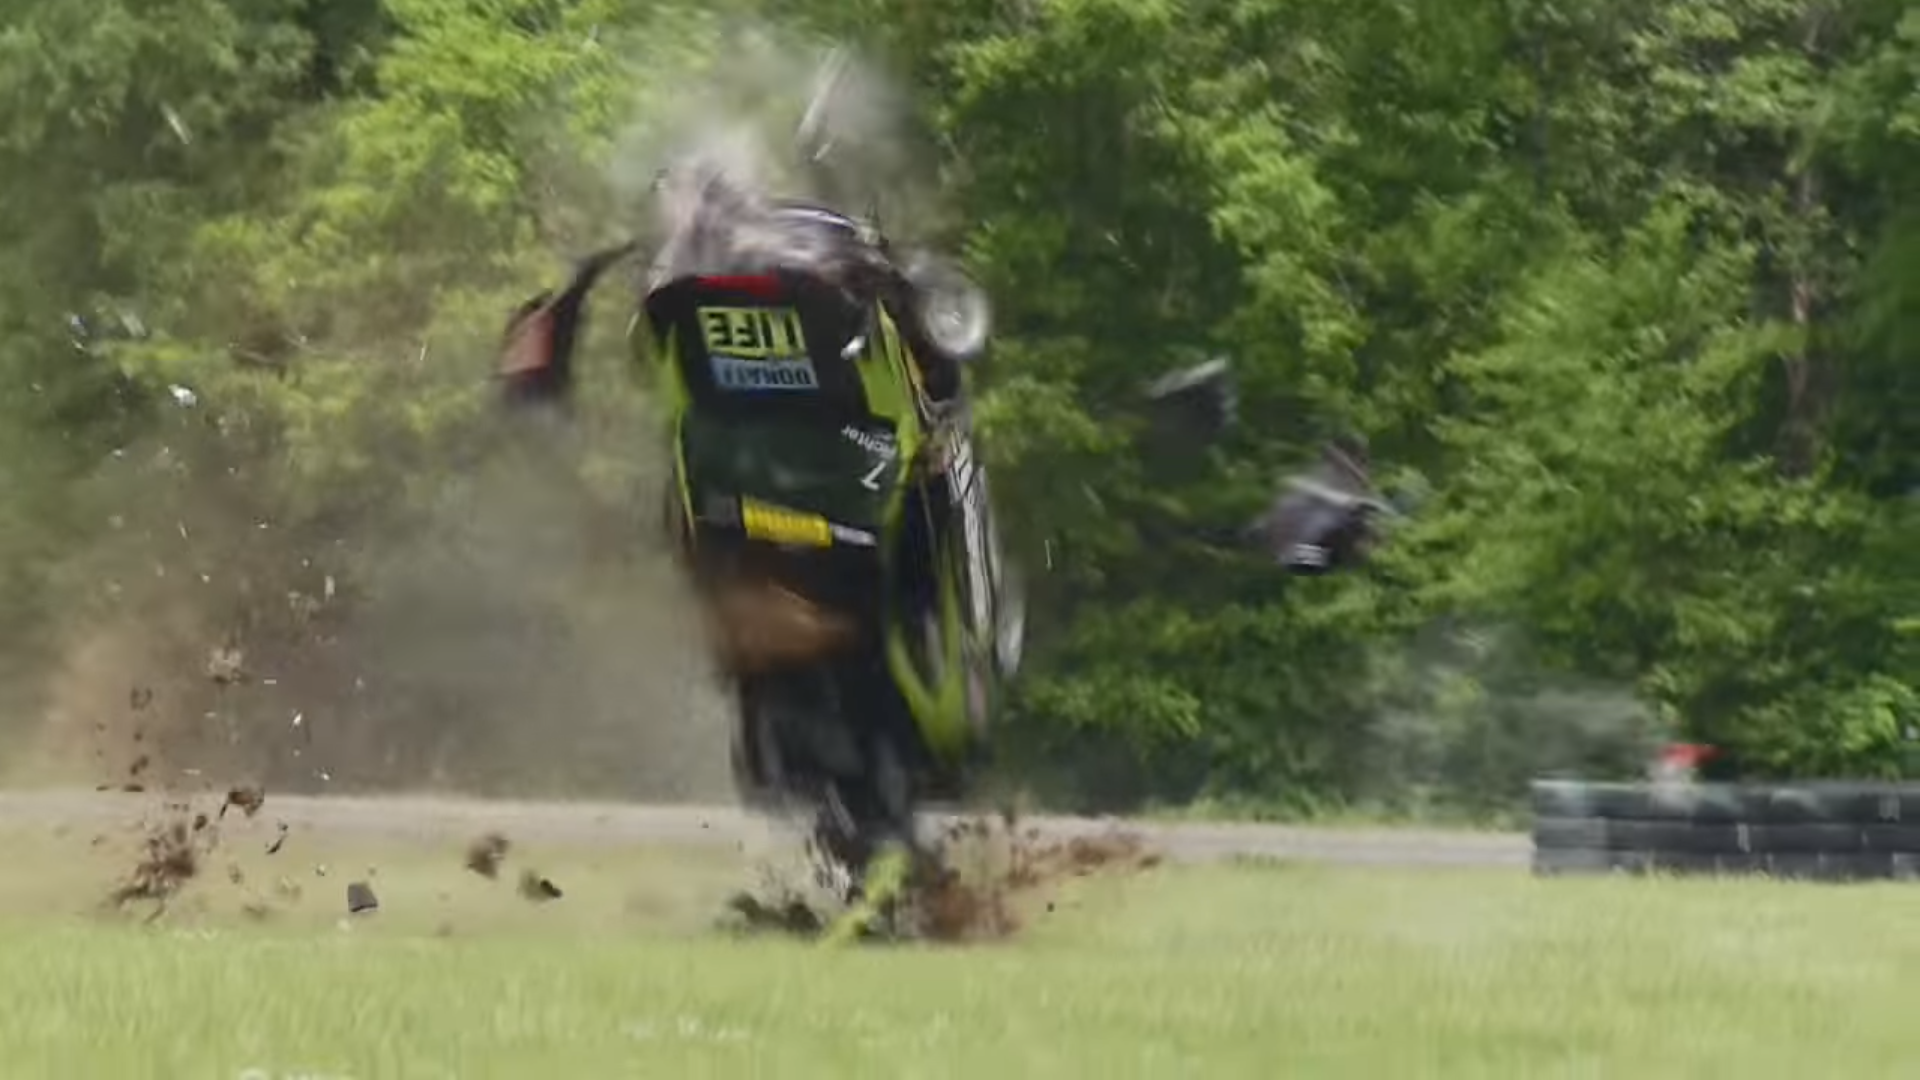 Watch This Touring Car Flip 7 Times After Sliding Off Track